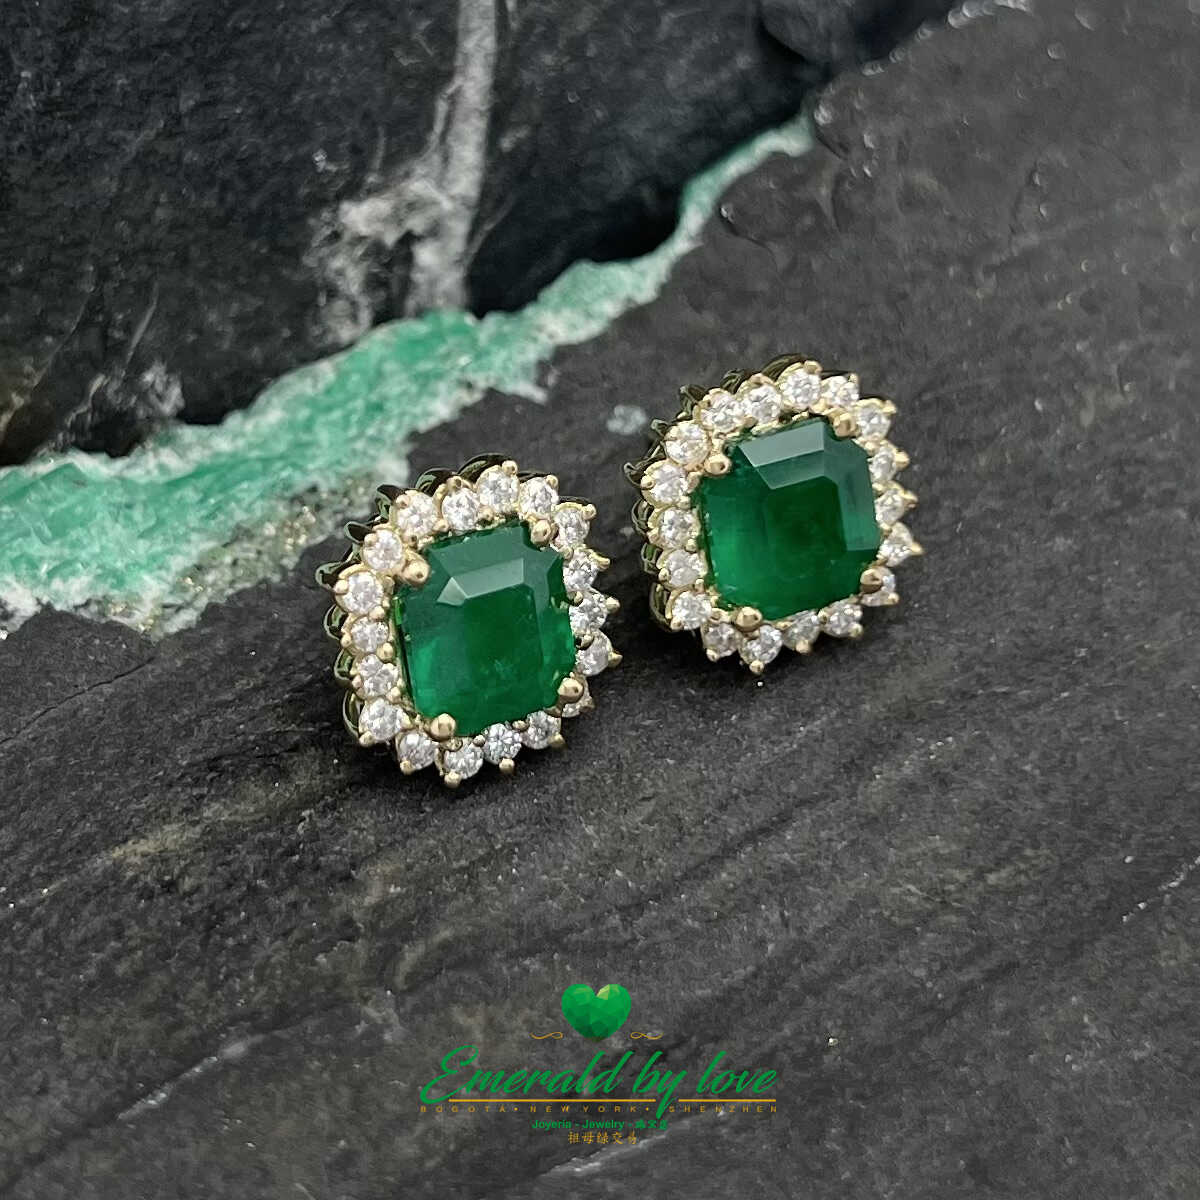 Regal Marquise Majesty - 18k Yellow Gold Earrings with Square Emeralds